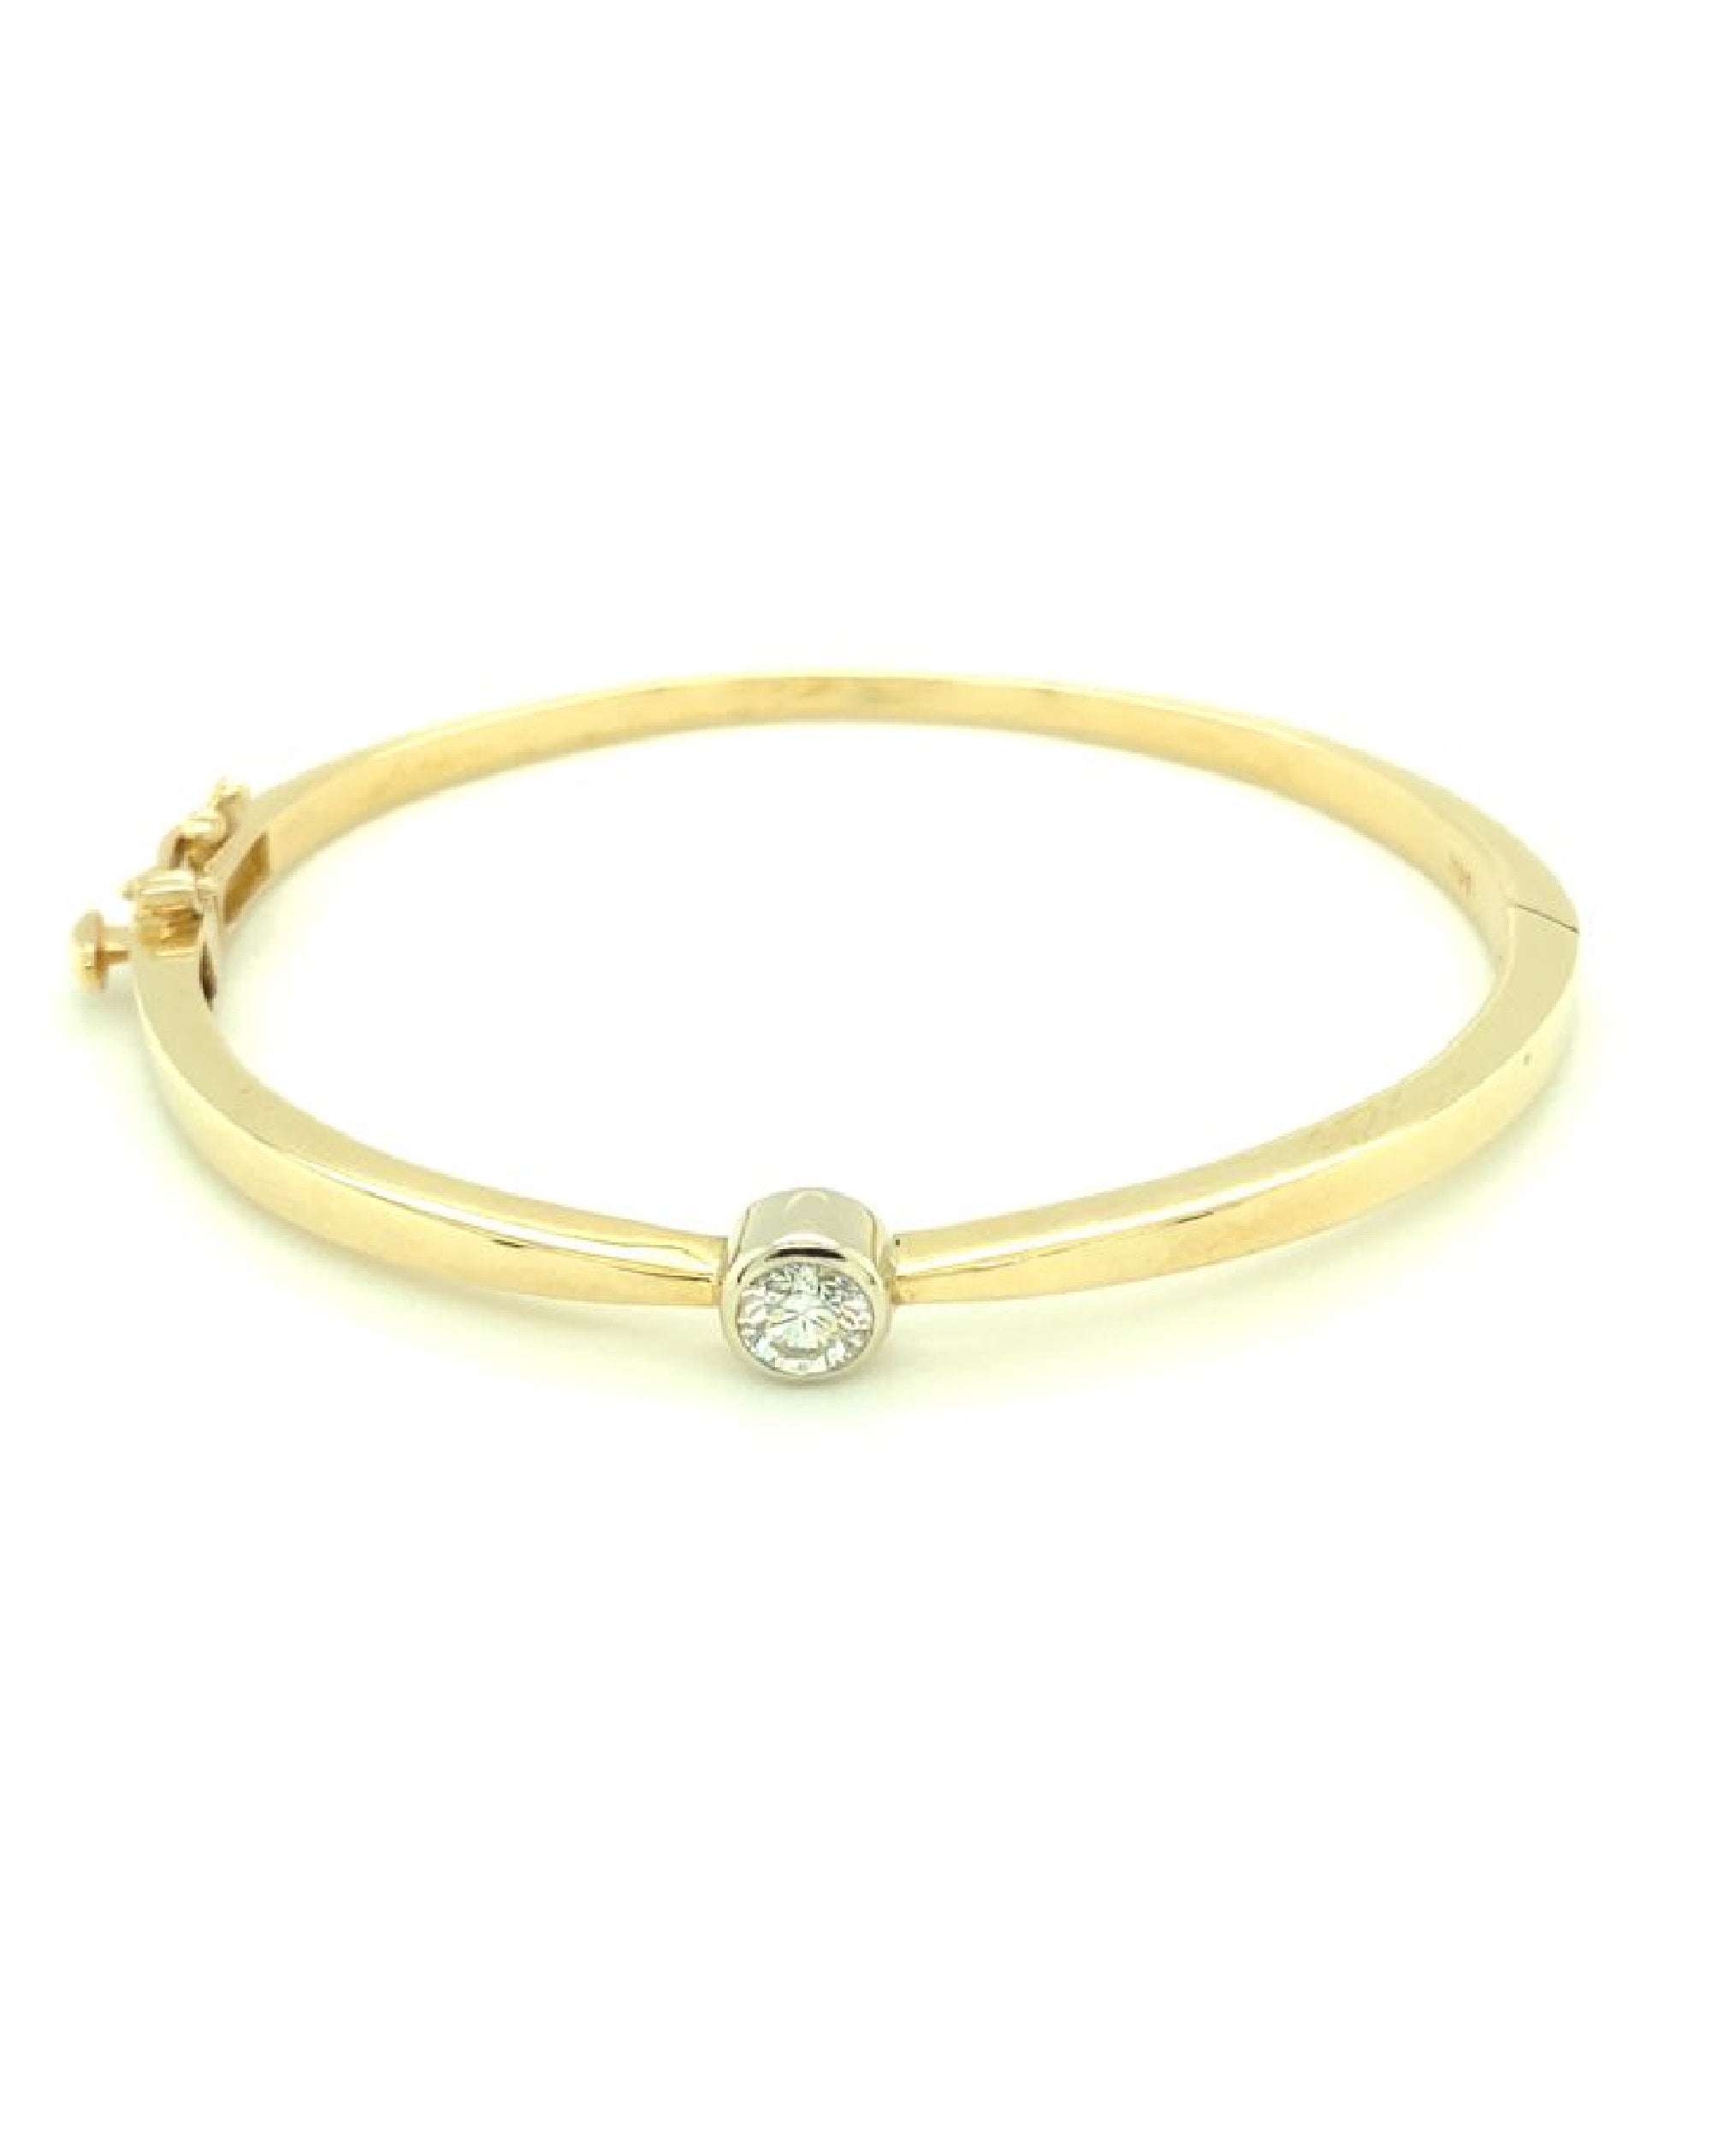 Latest Bangles - Buy Classic Solitaire Bangles At Online